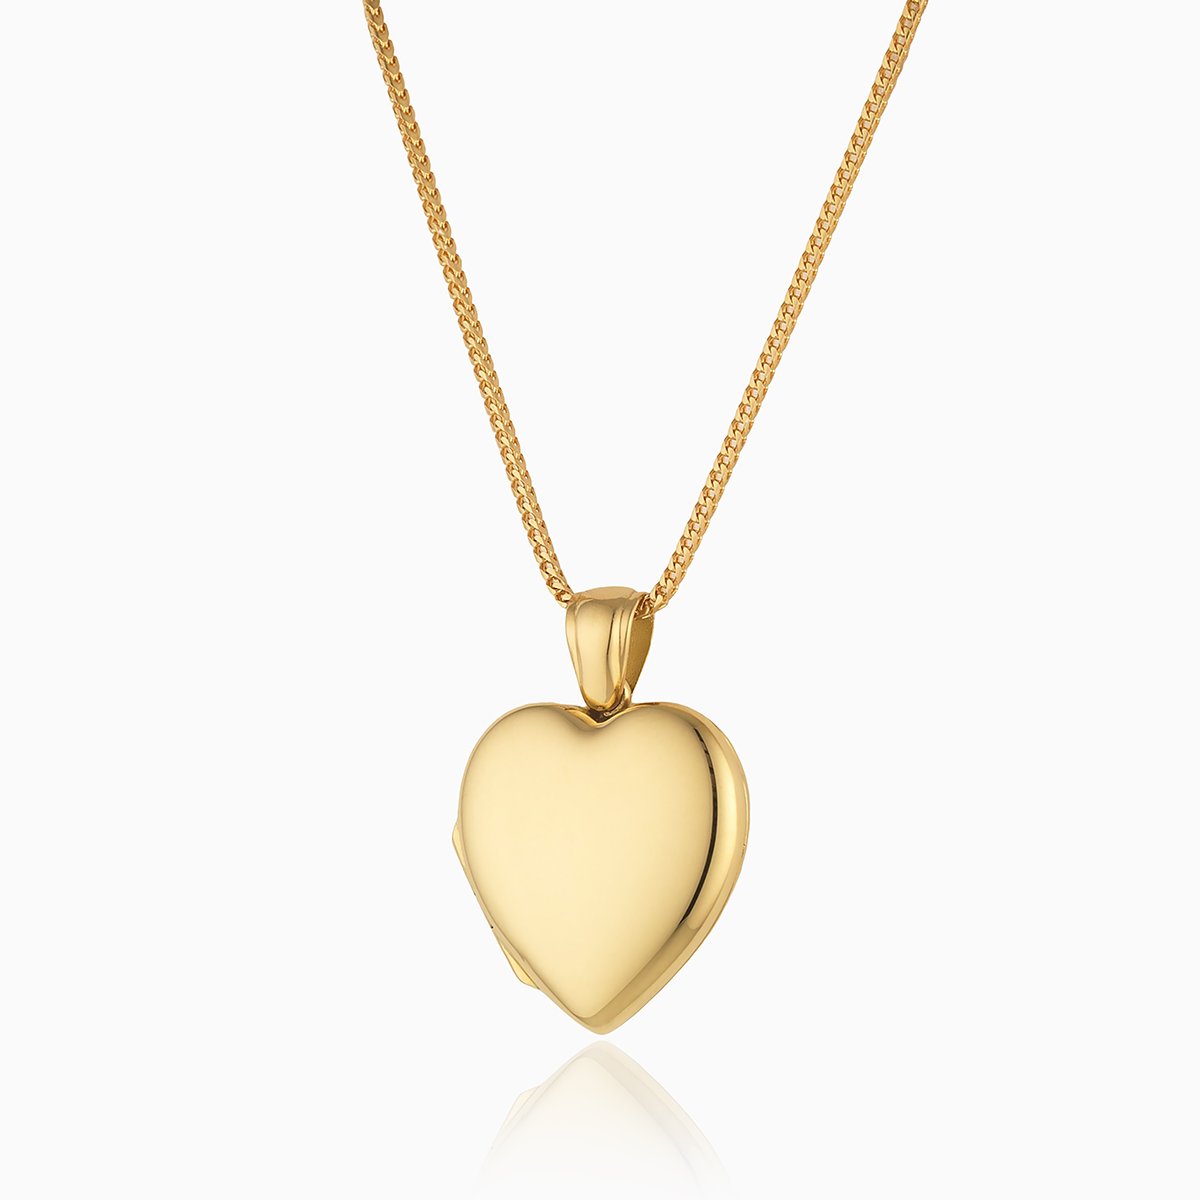 18 ct gold heart locket on an 18 ct gold franco chain